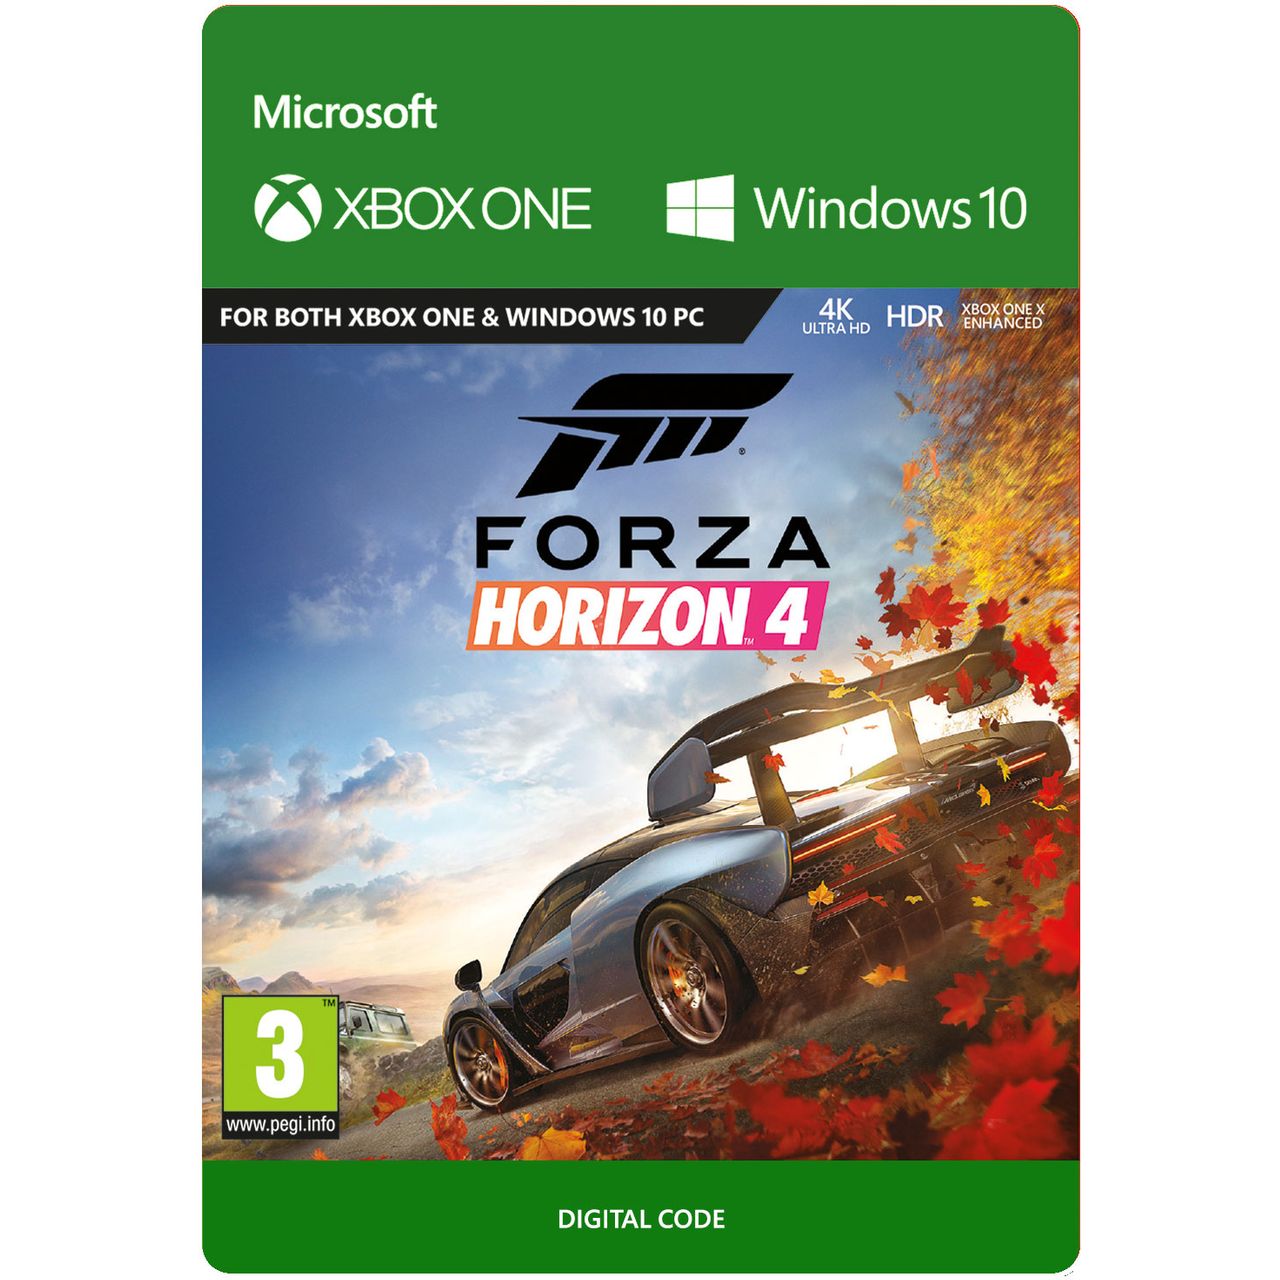 Forza Horizon 4: Standard Edition for Xbox One [Enhanced for Xbox One X] Review